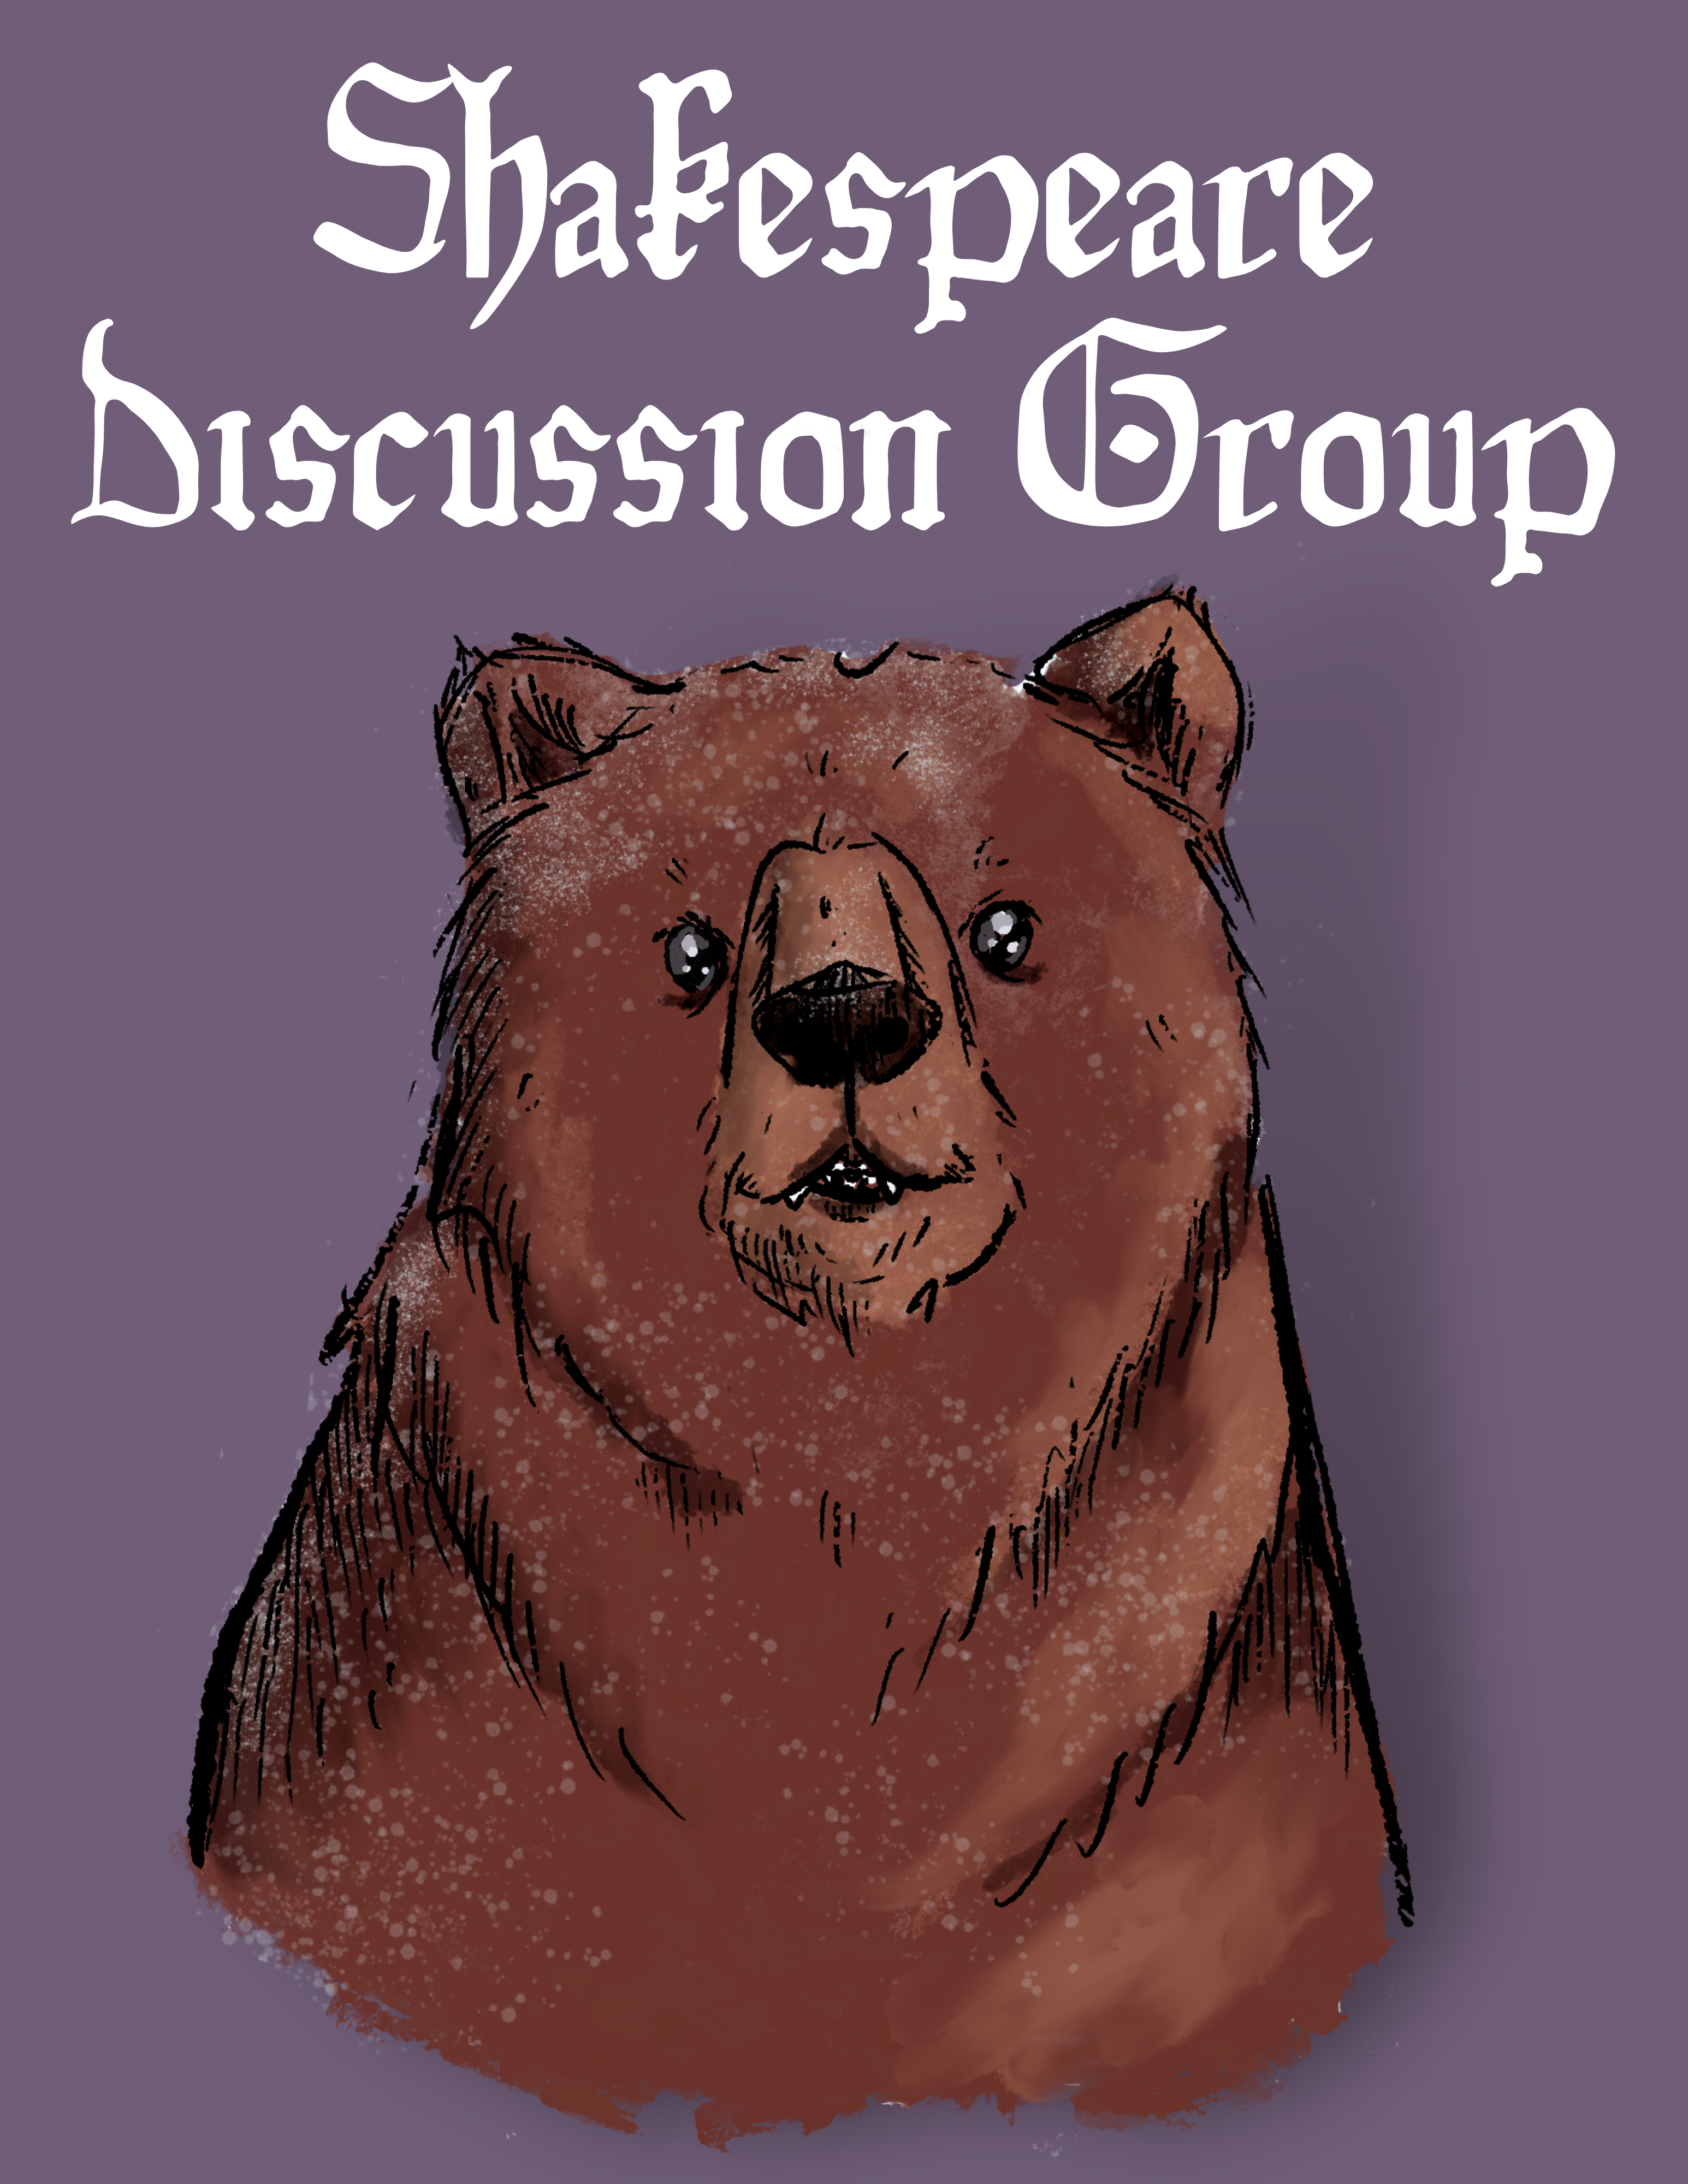 Shakespeare Discussion Group, Brown Bear on lavender background